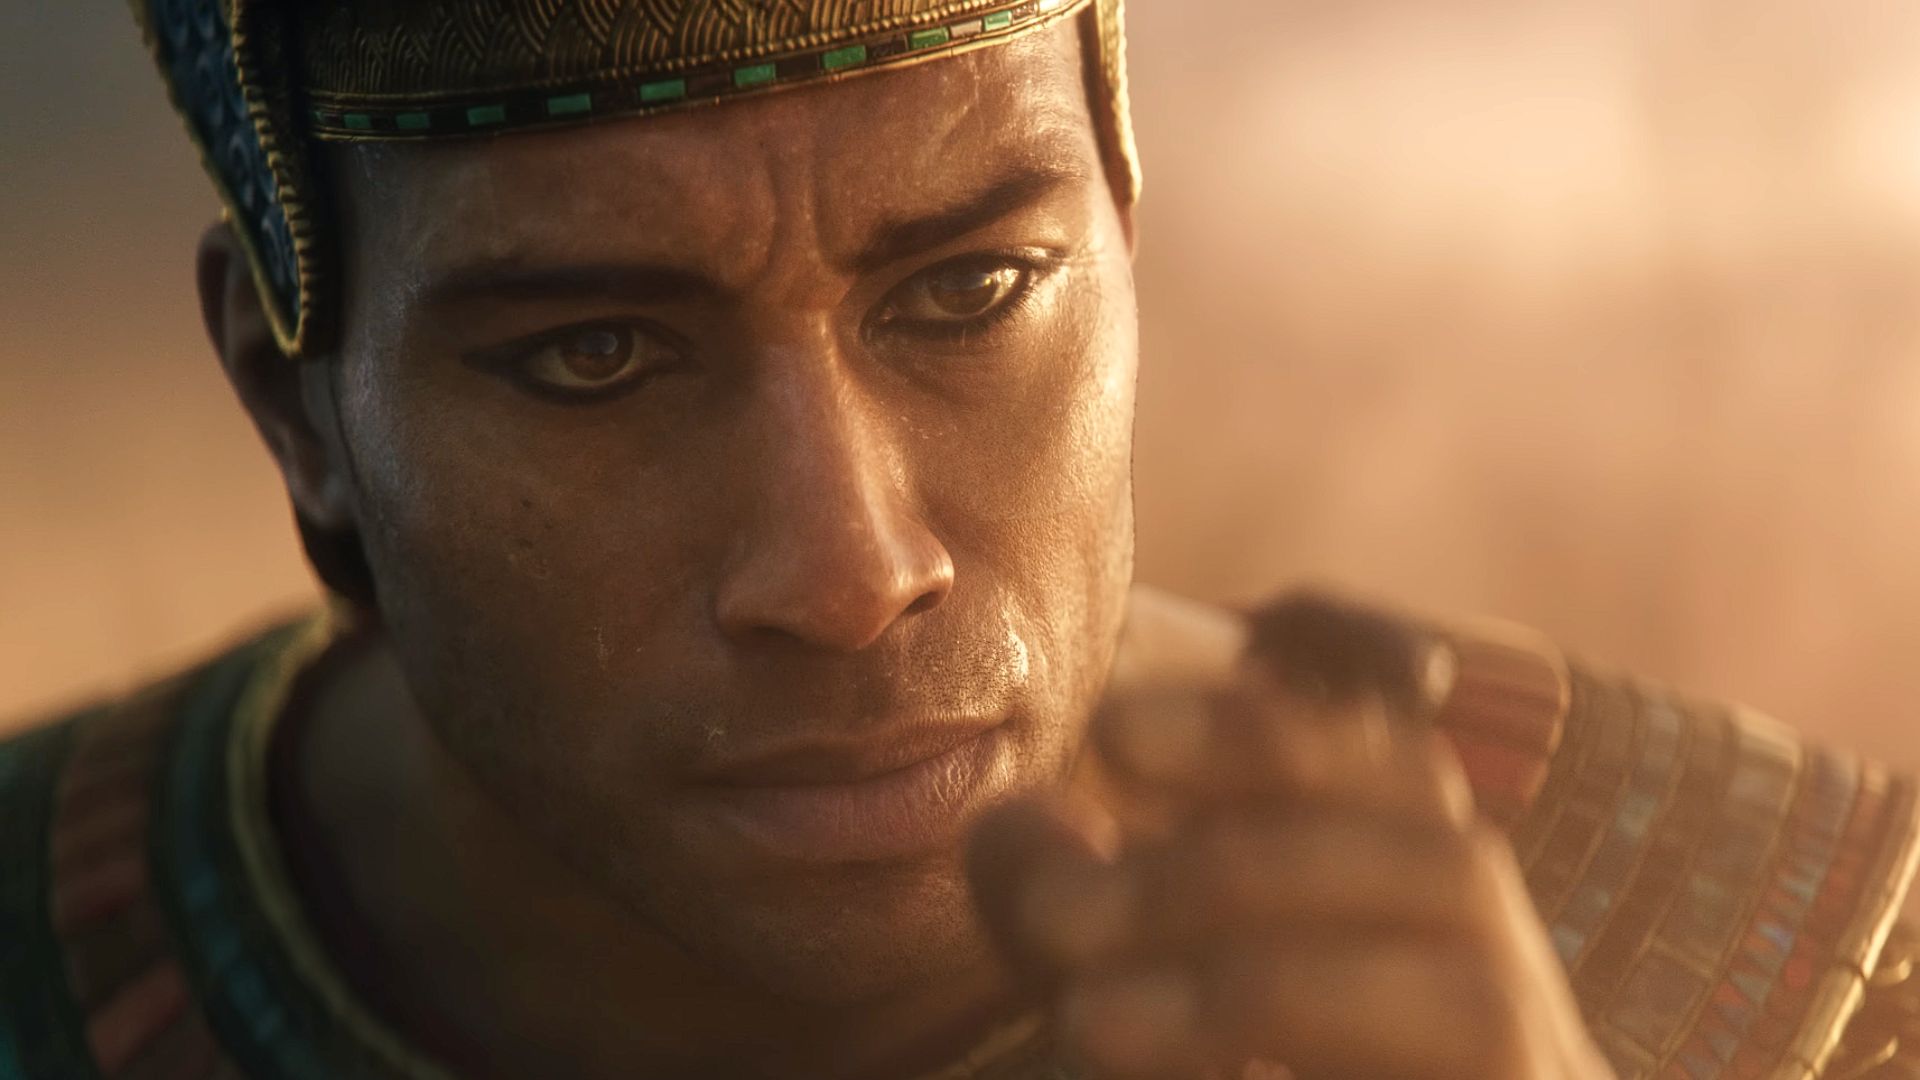 Total War Pharaoh isn't about winning, it's about apocalyptic survival